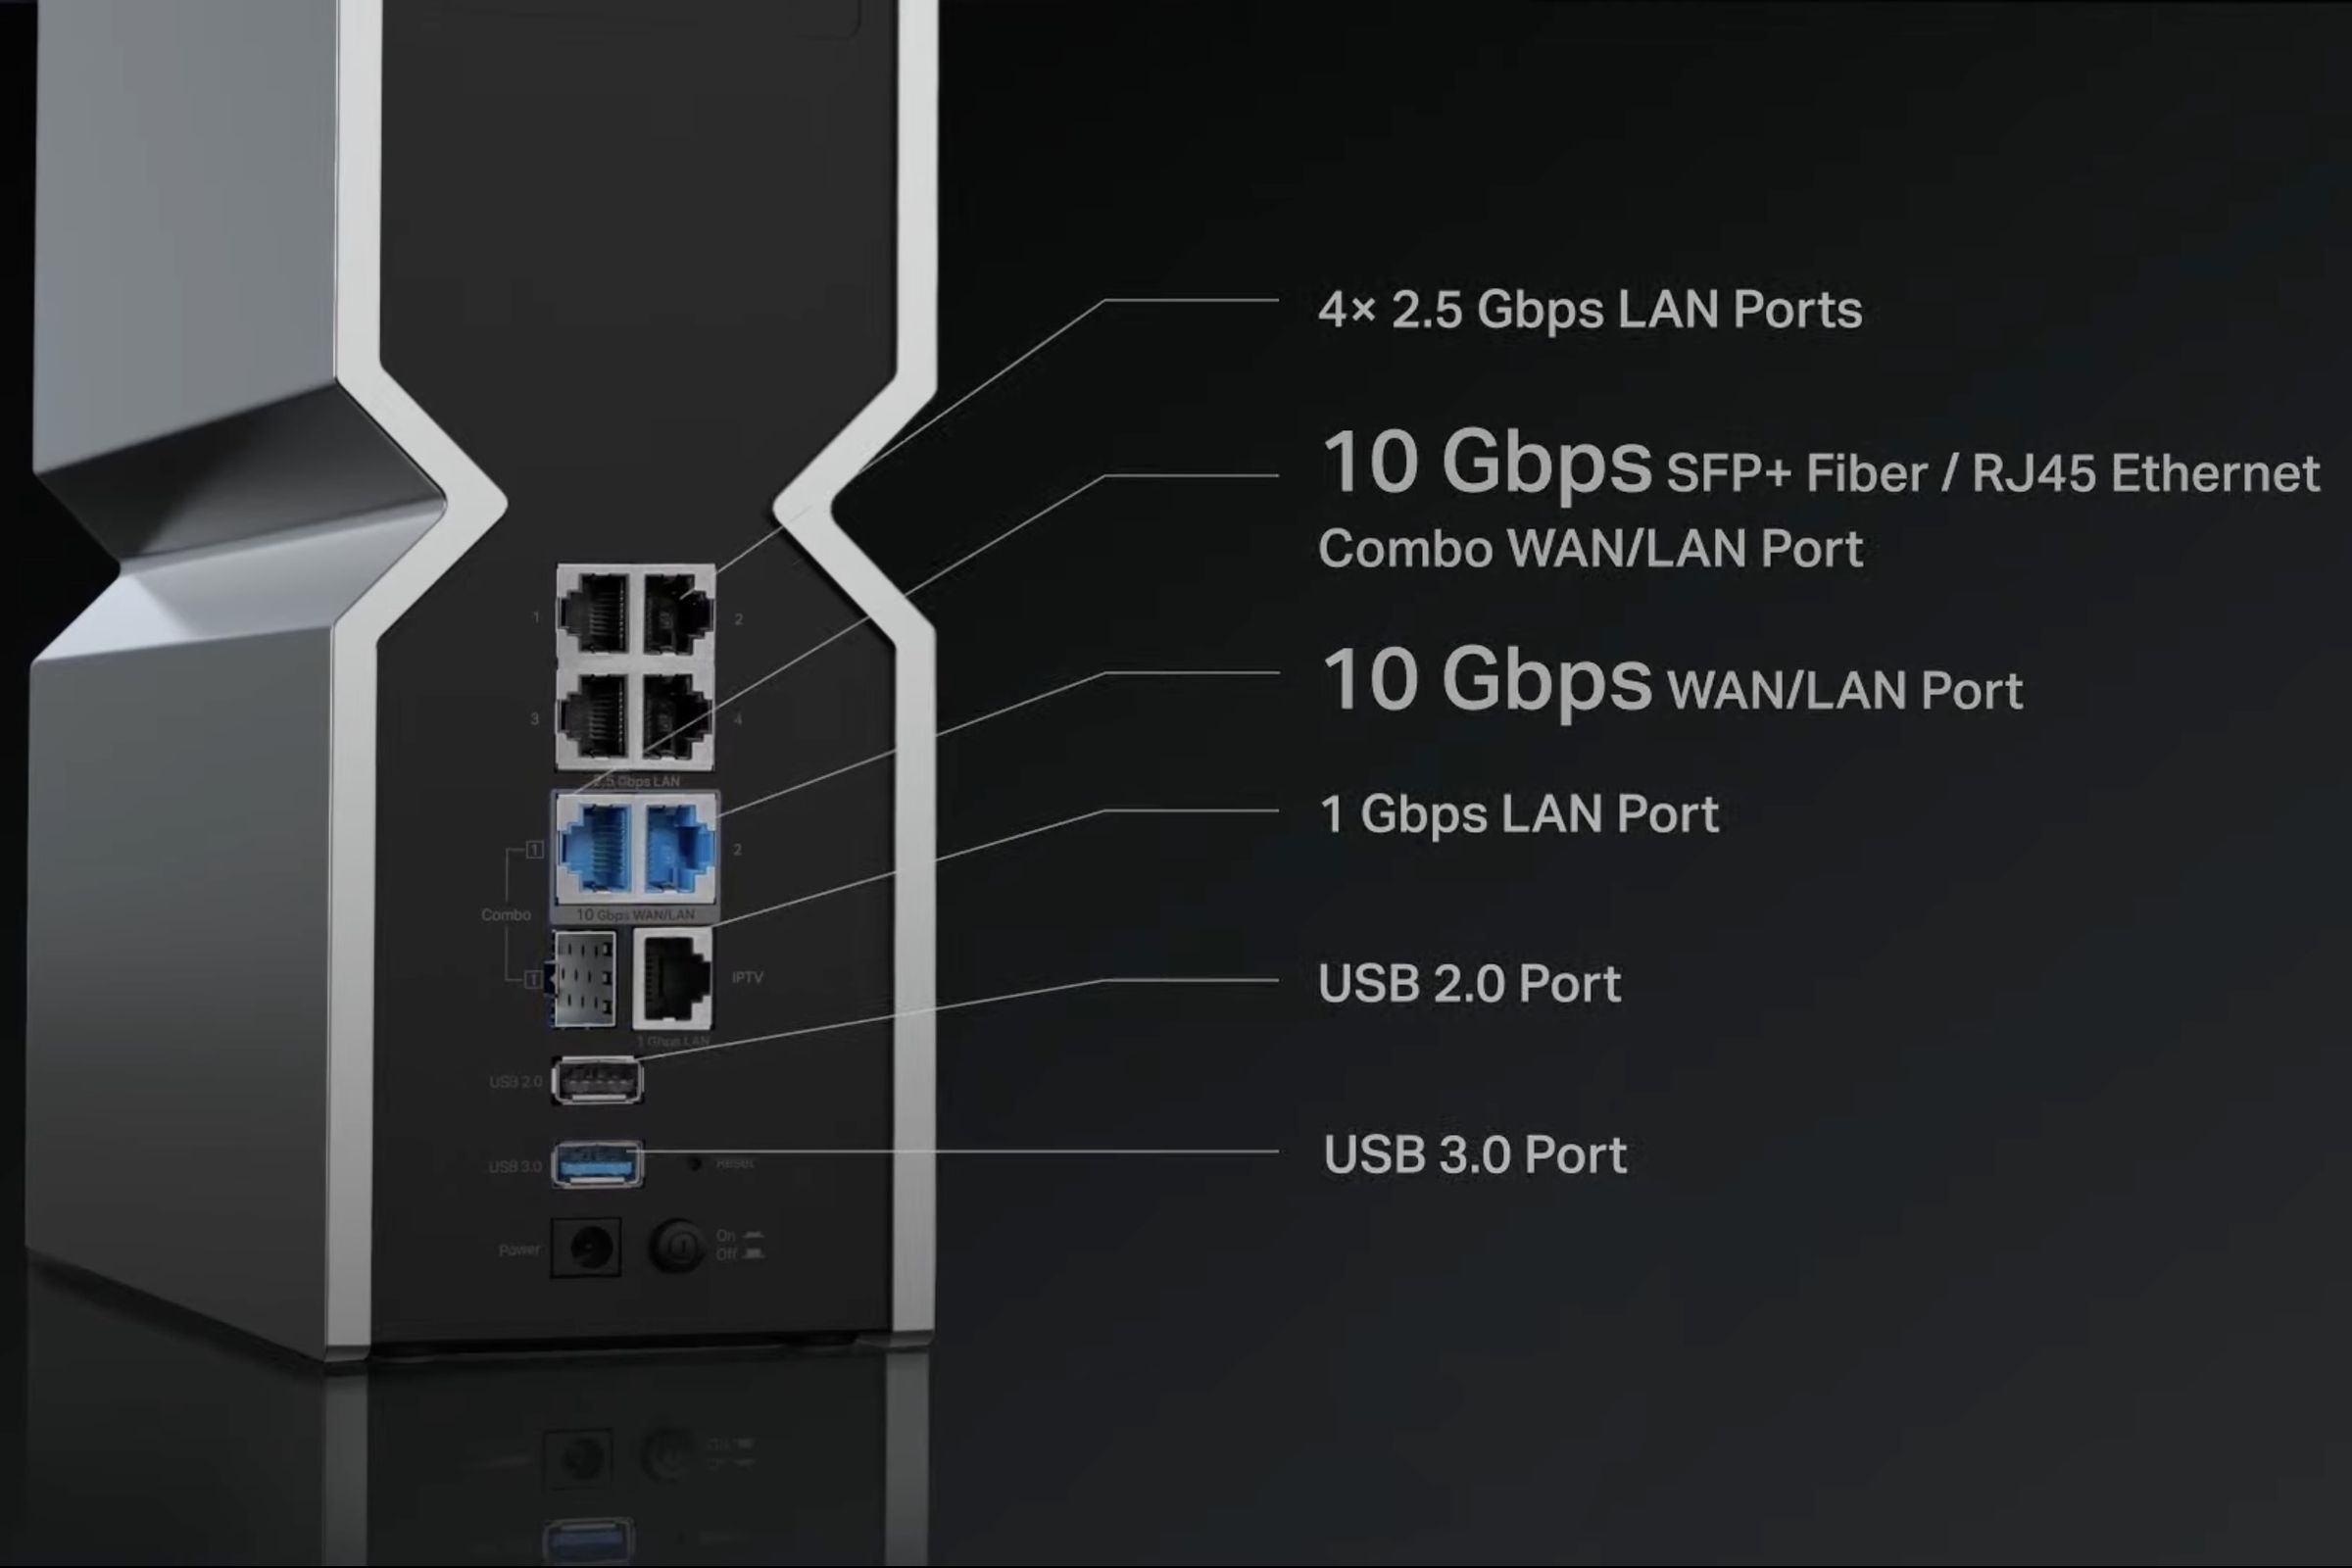 TP-Link’s BE900 offers a whole lot of connectivity.